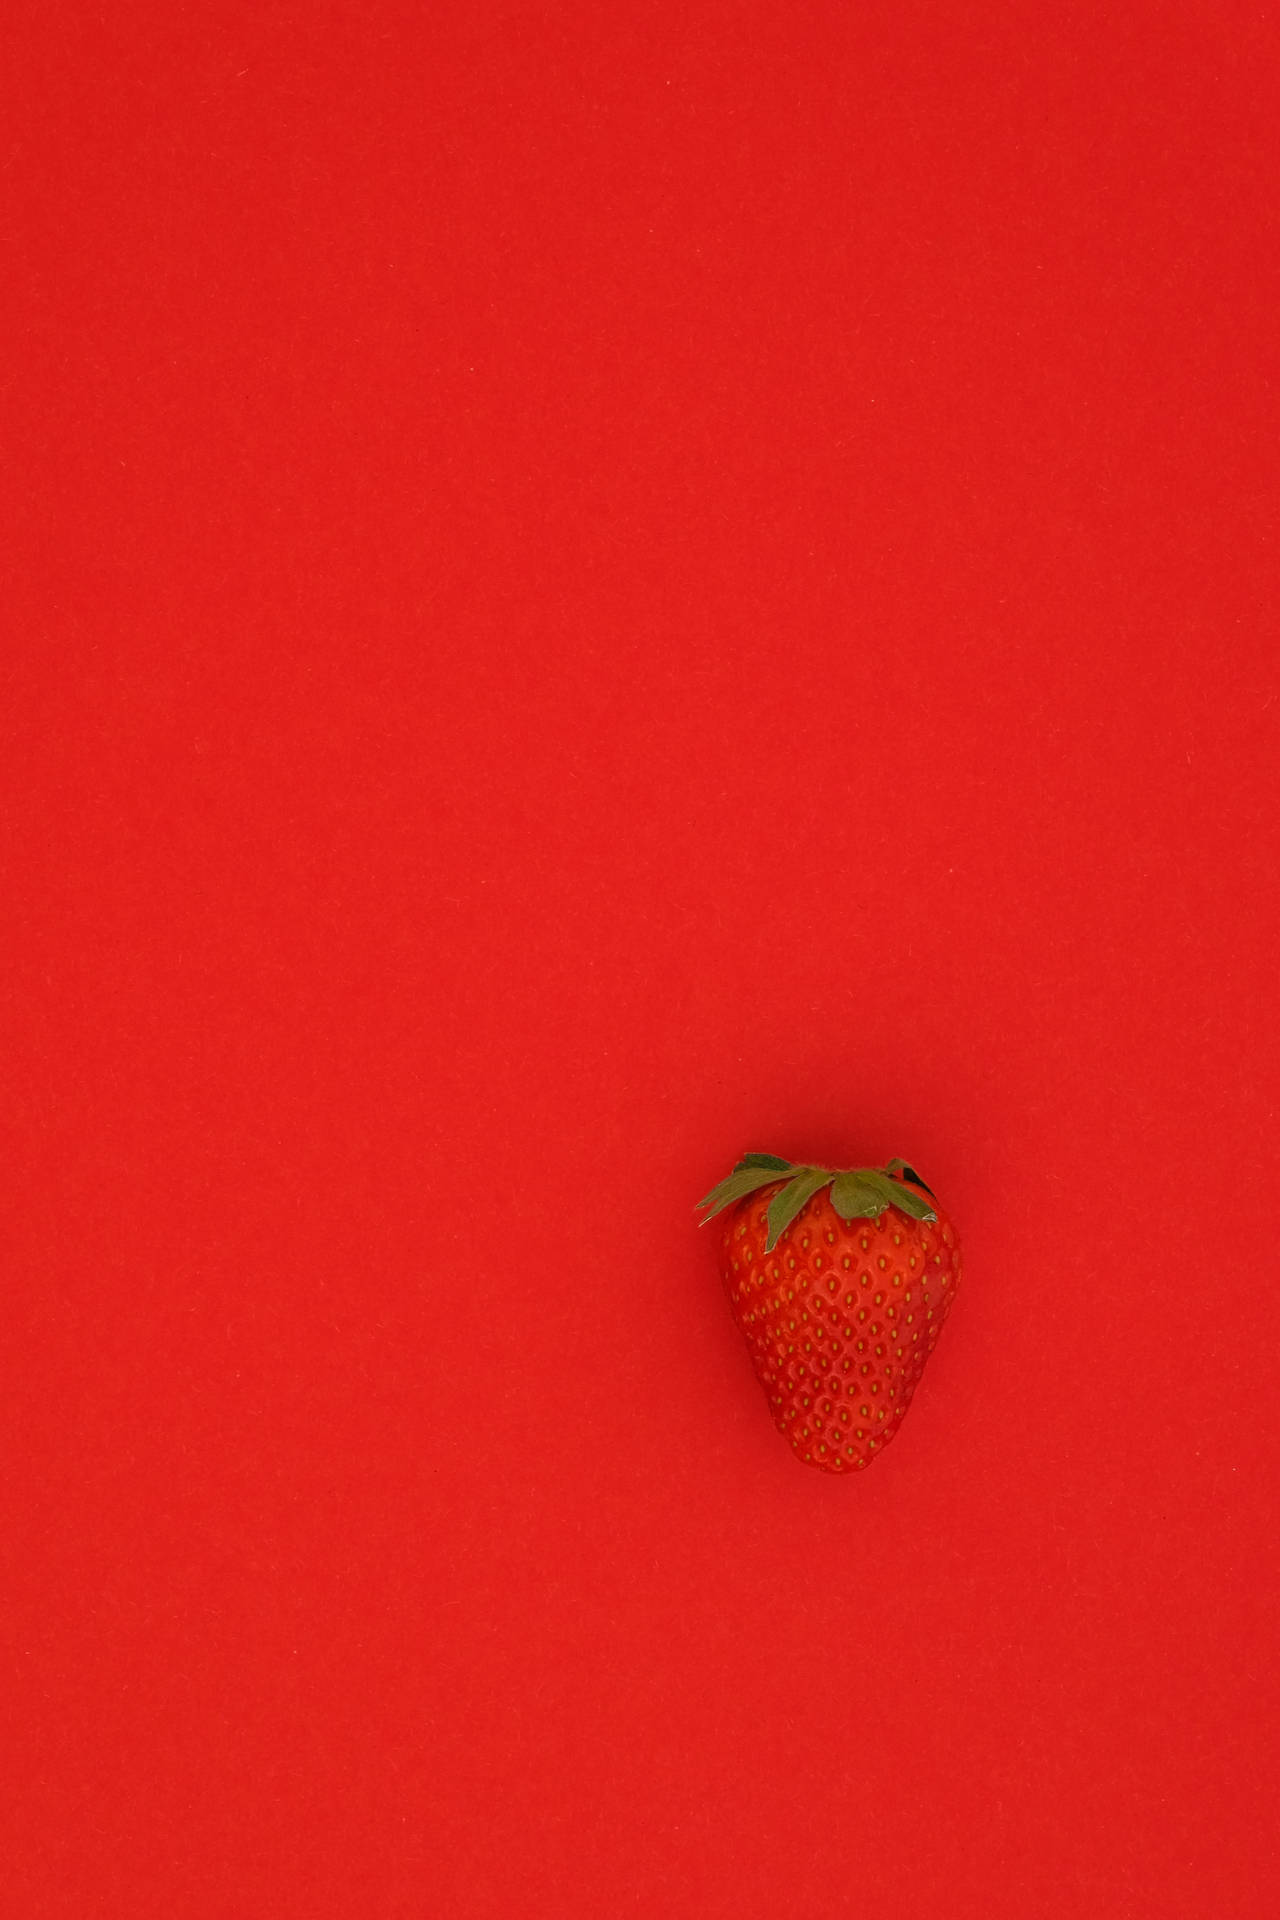 A Delicious And Juicy Red Strawberry. Background